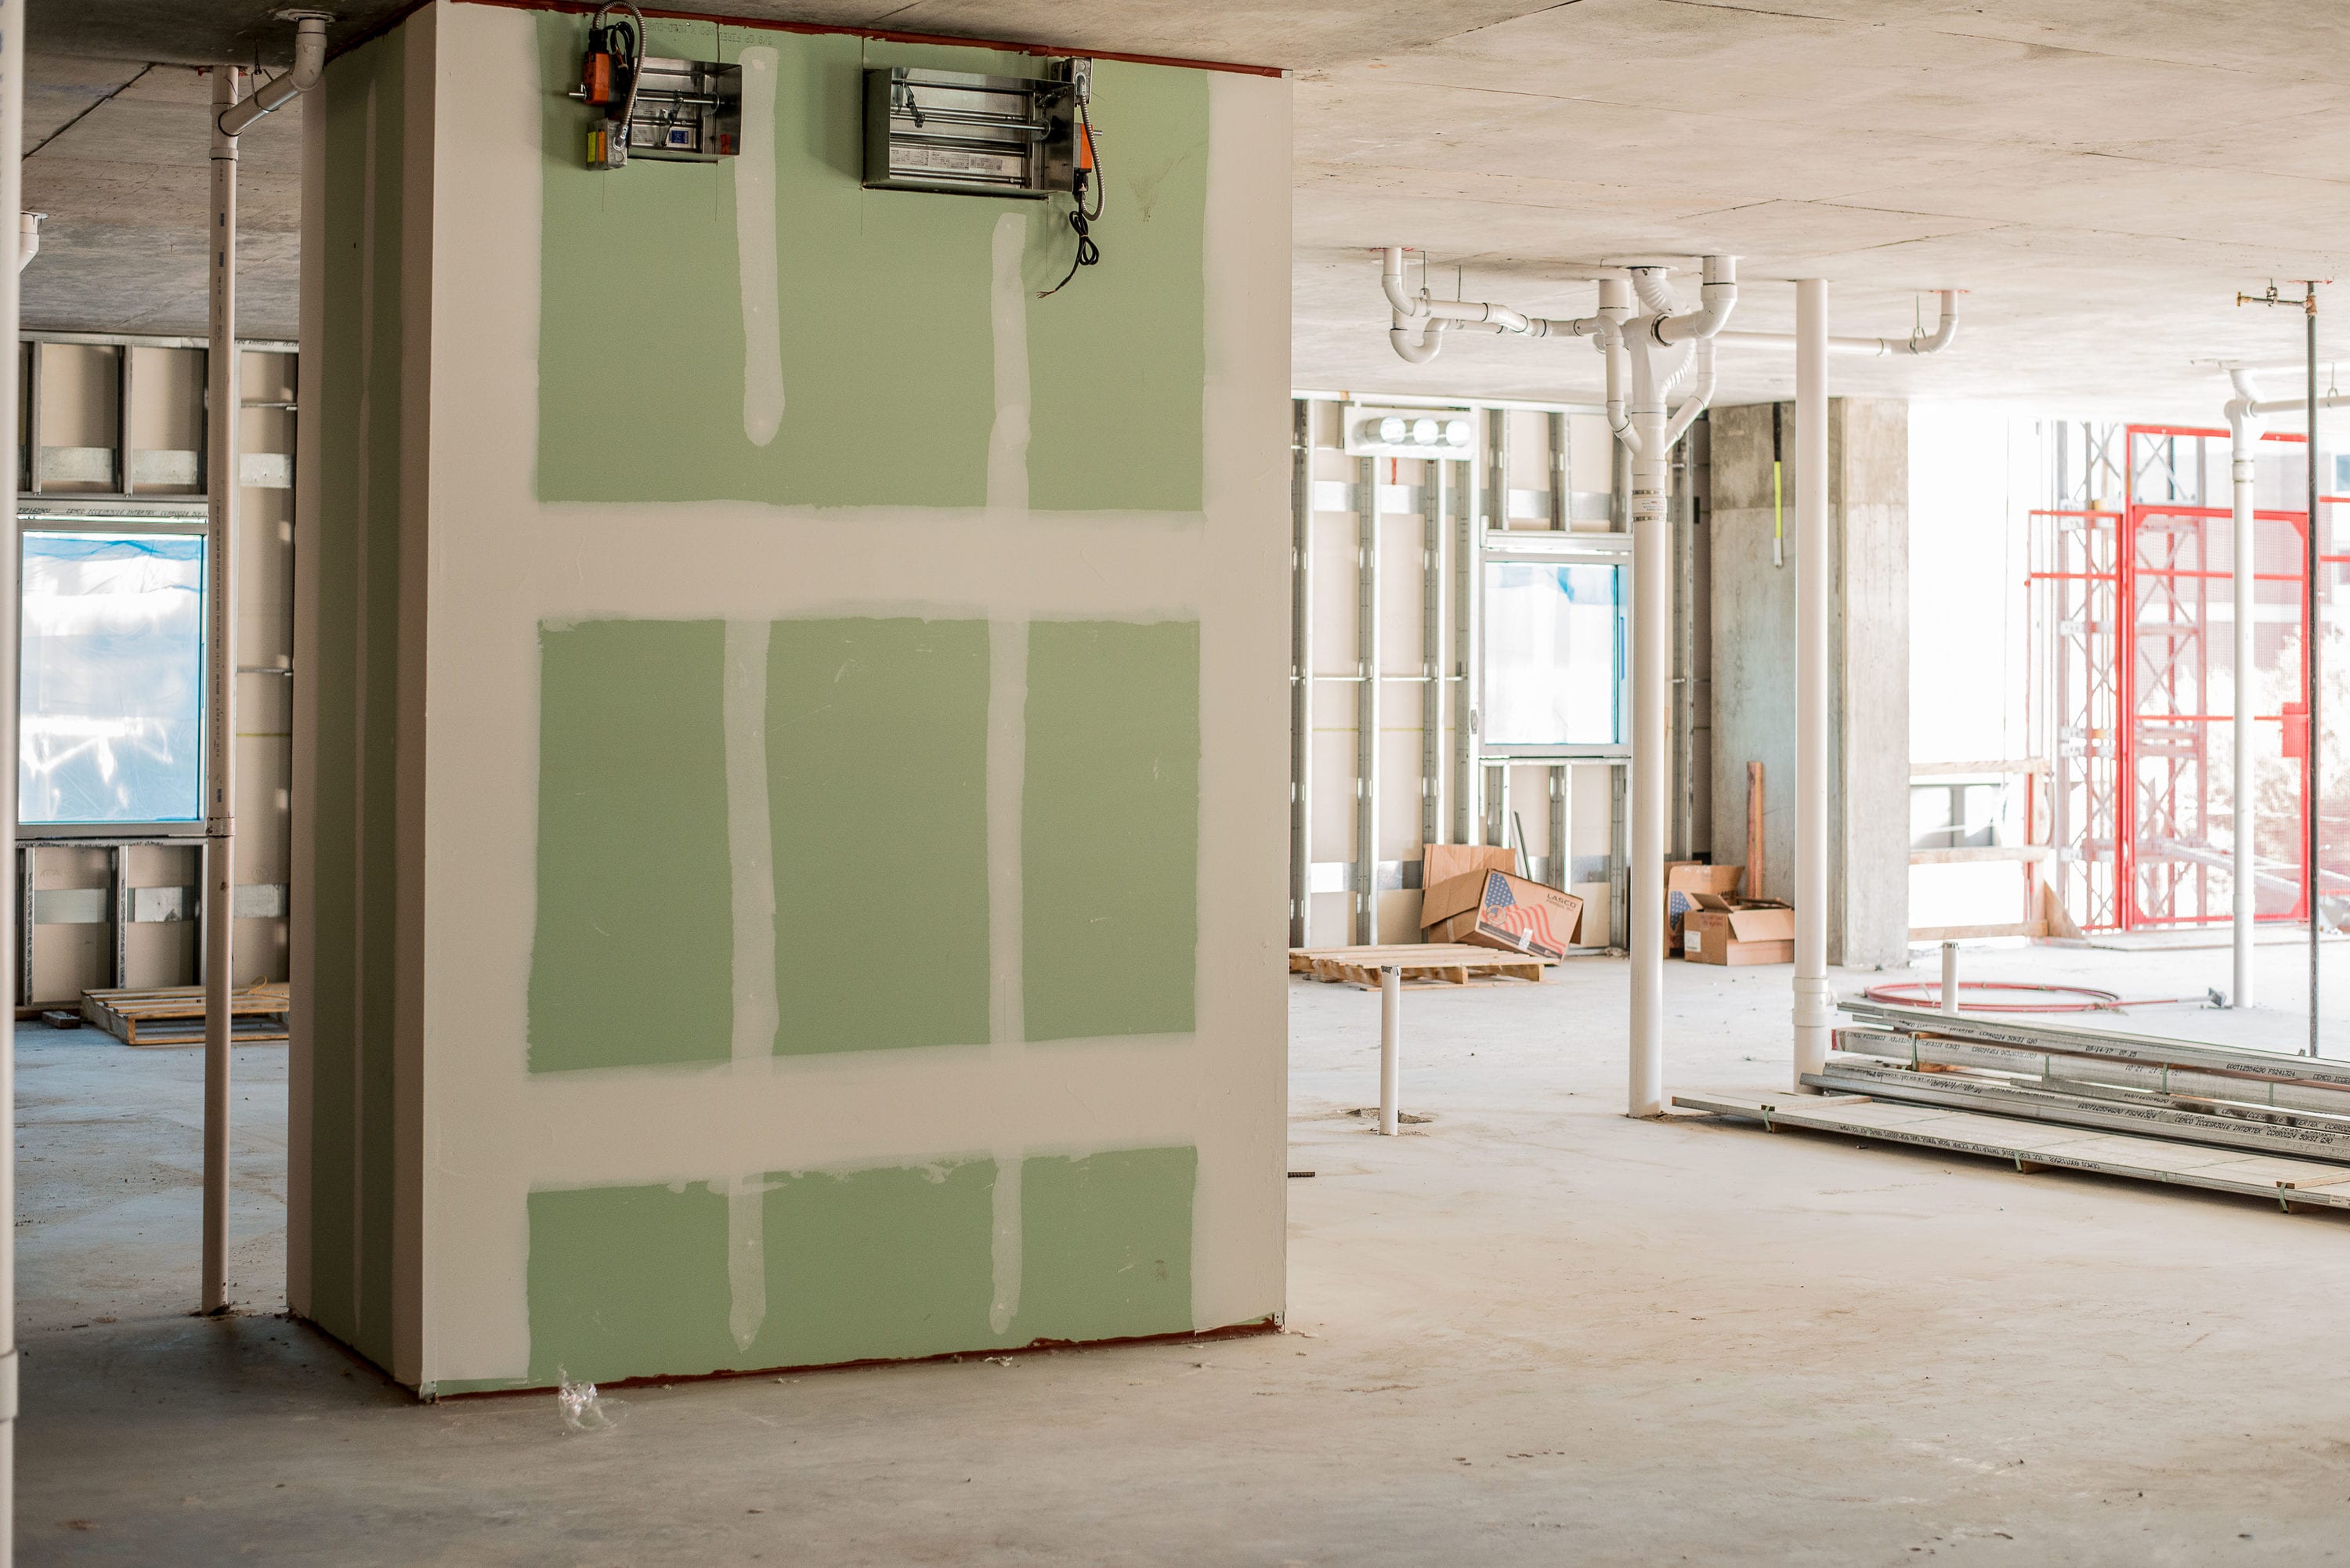 What Is Greenboard Drywall?